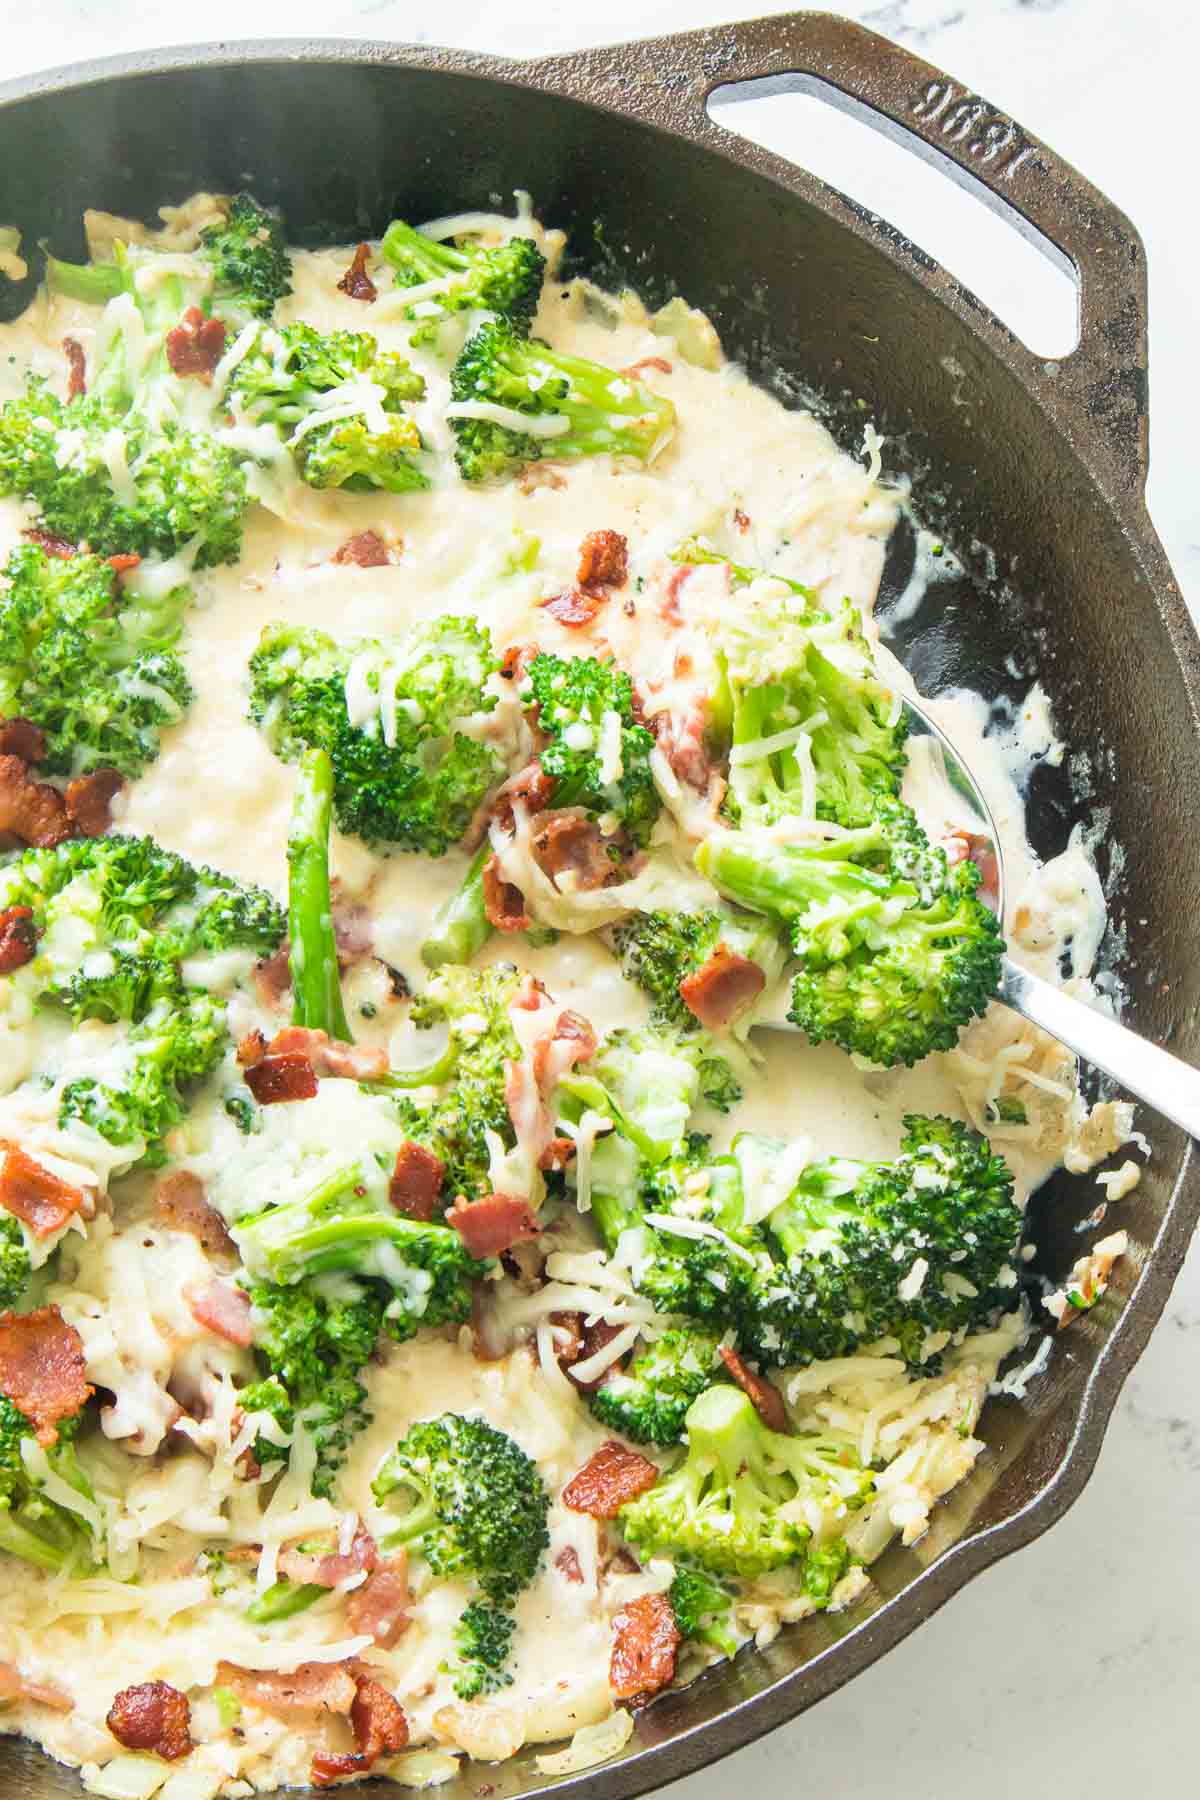 Broccoli and bacon in a creamy sauce in a skillet